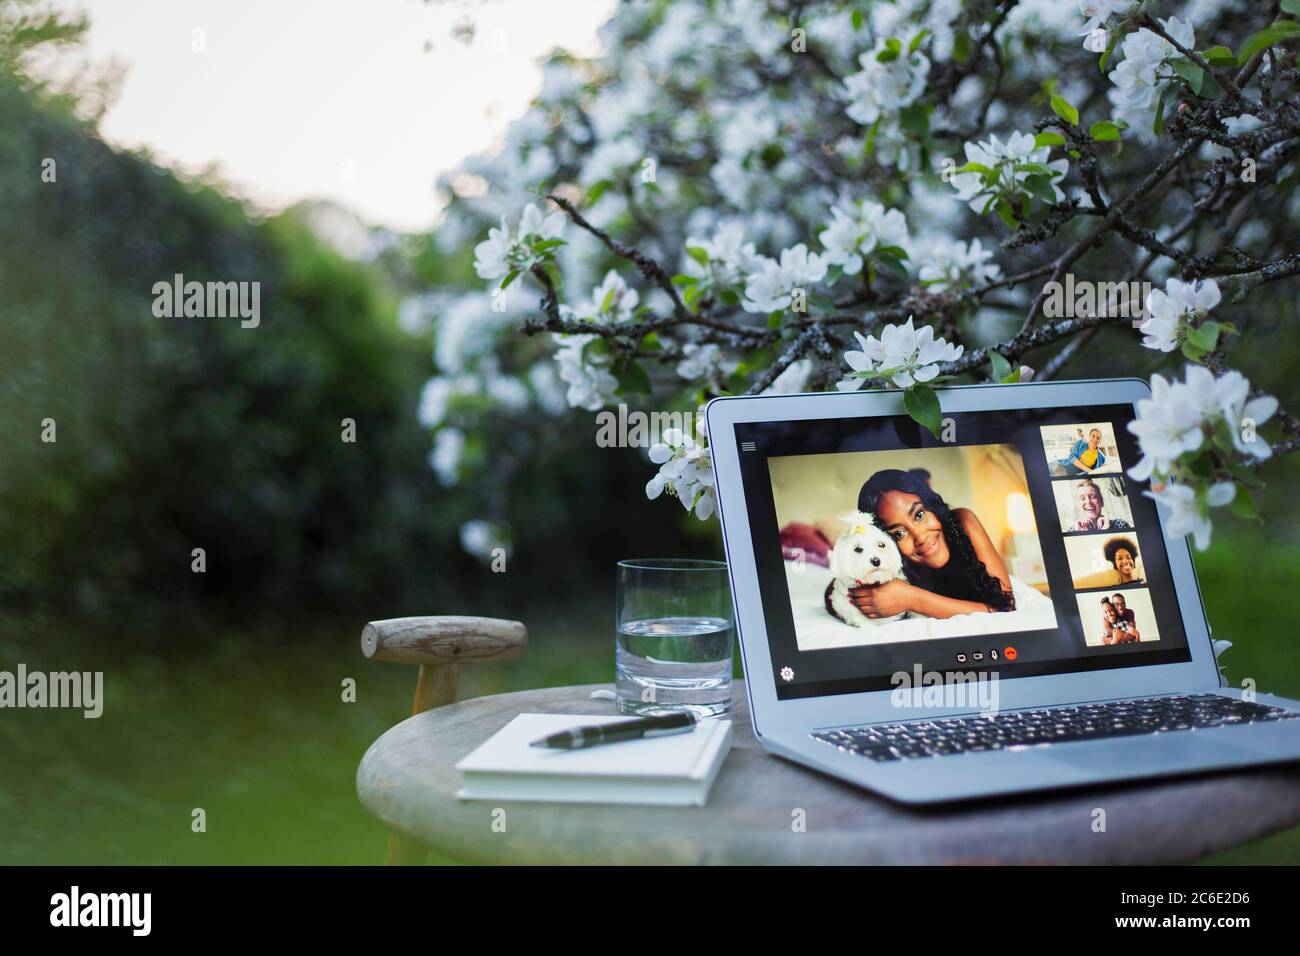 Friends video chatting on laptop screen in tranquil garden Stock Photo